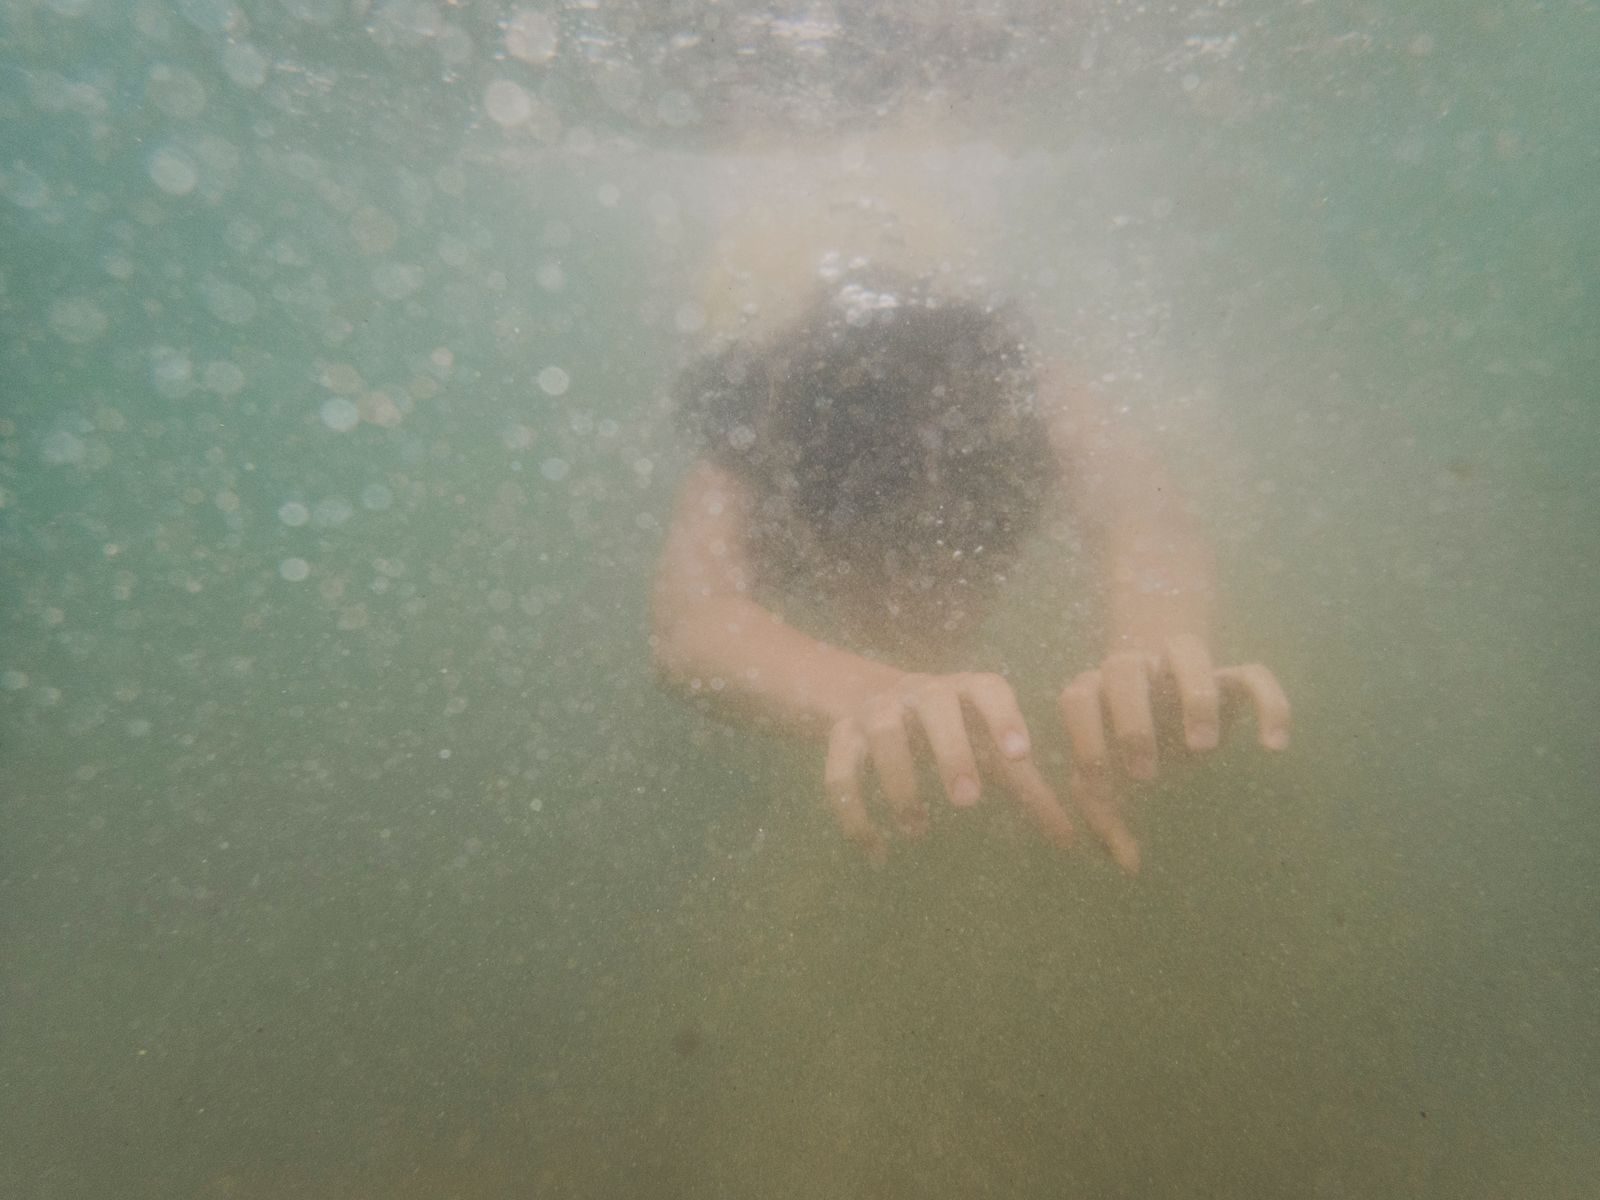 © Laura Fontaine - Image from the Water photography project